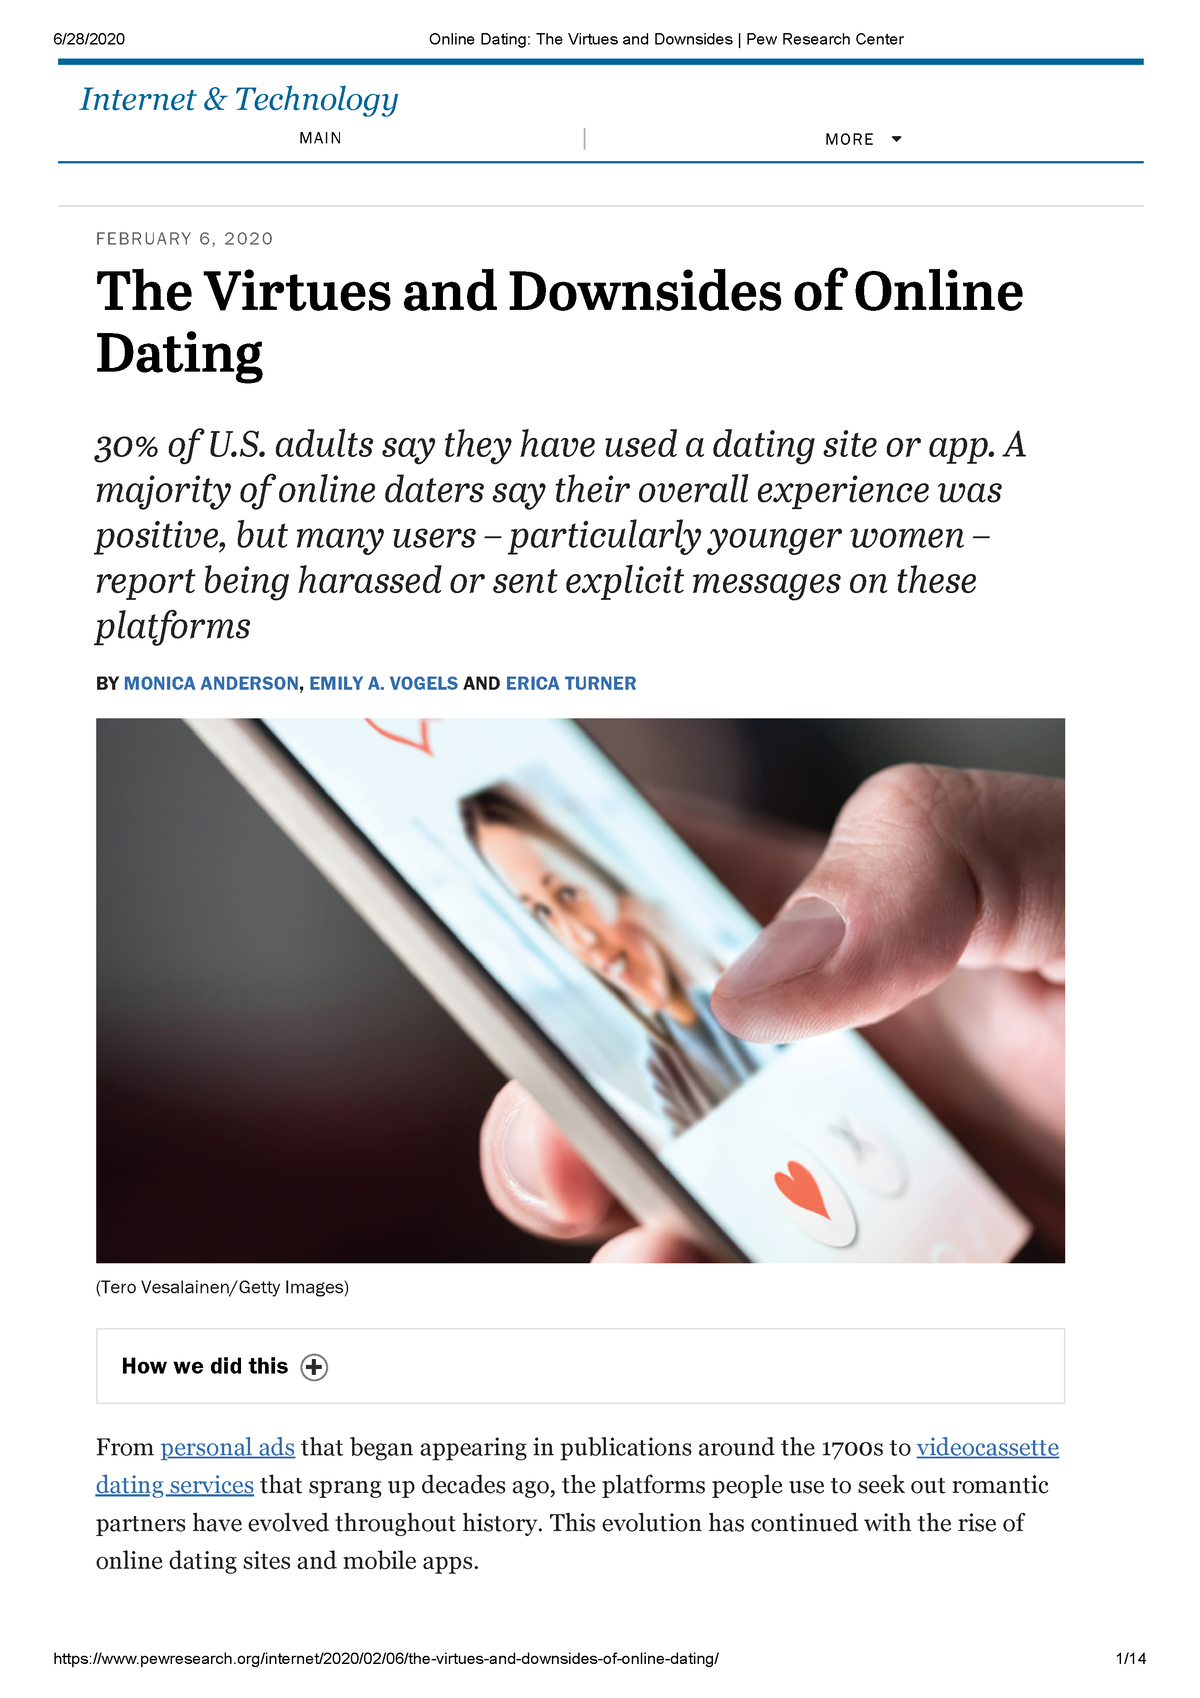 Online Dating The Virtues And Downsides Pew Research Center Article Executive Summary